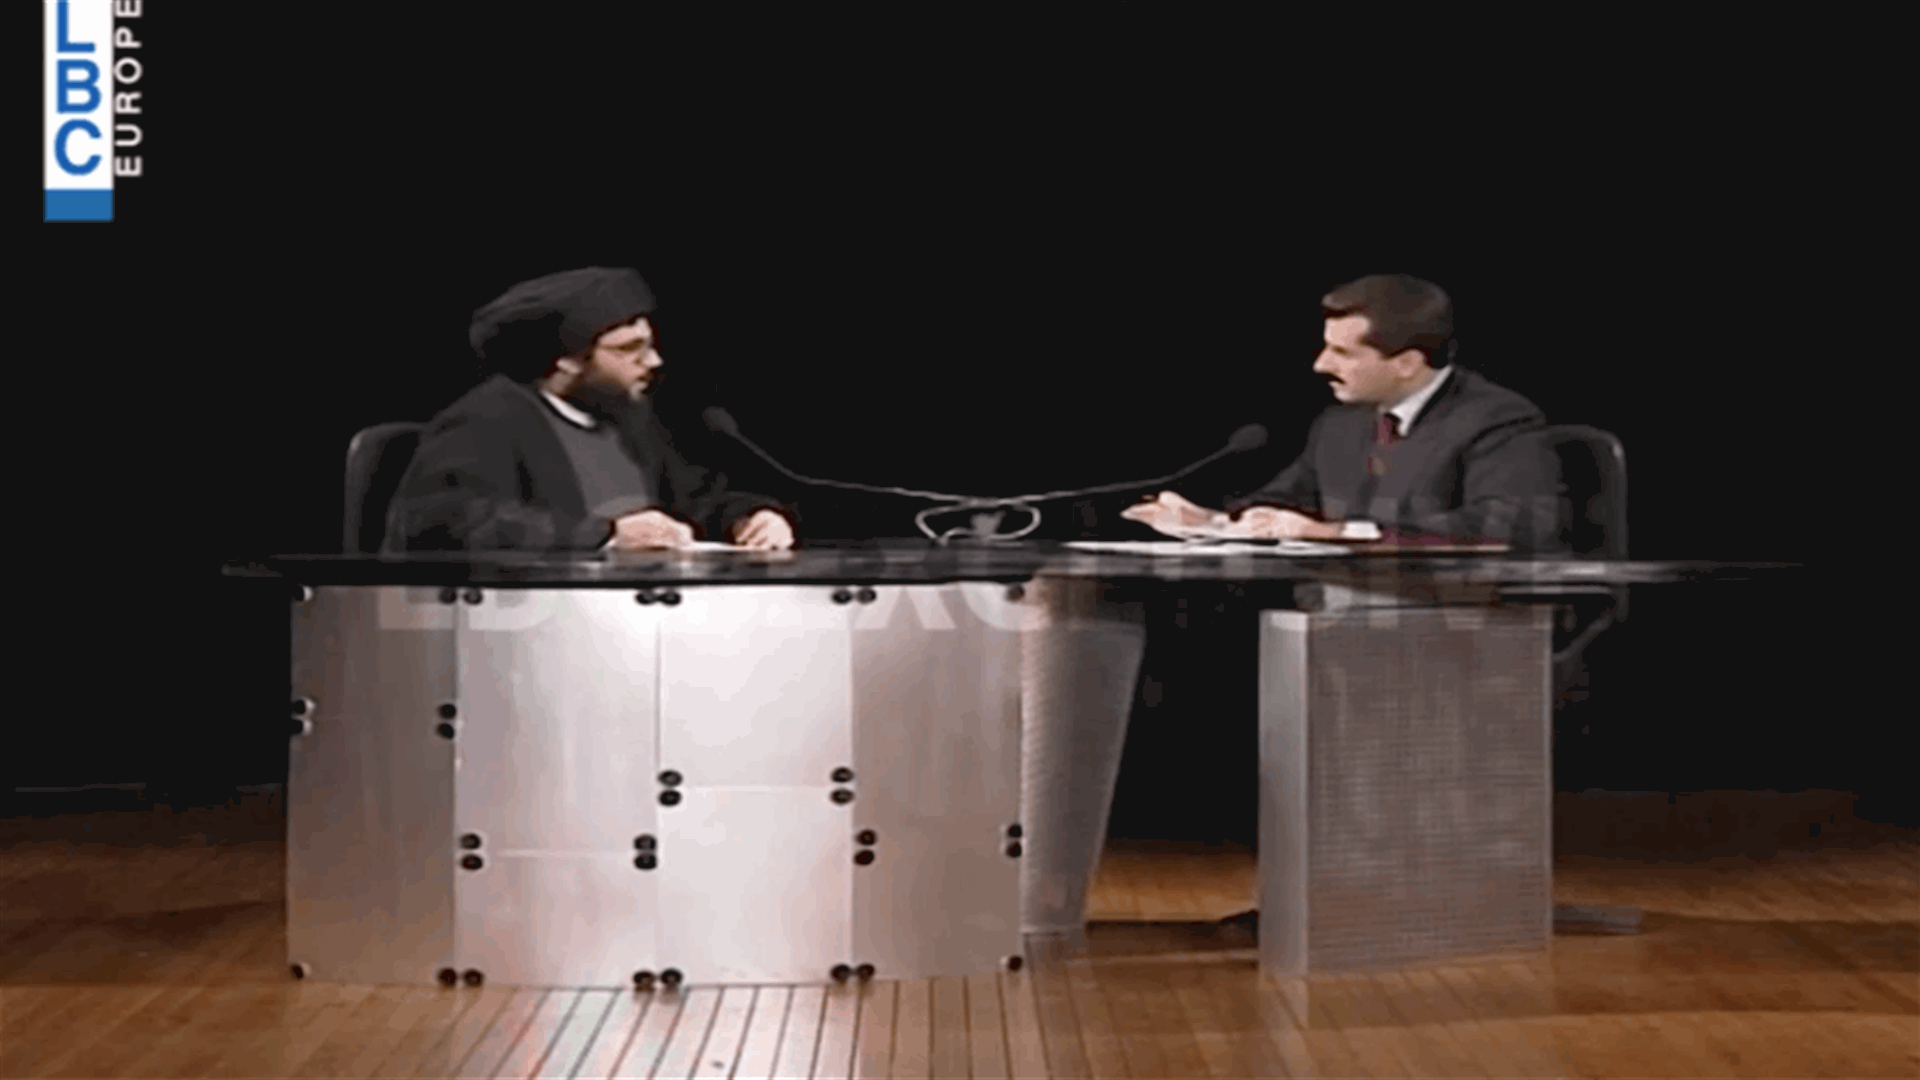 First interview of Hezbollah chief Nasrallah on LBCI in 1995